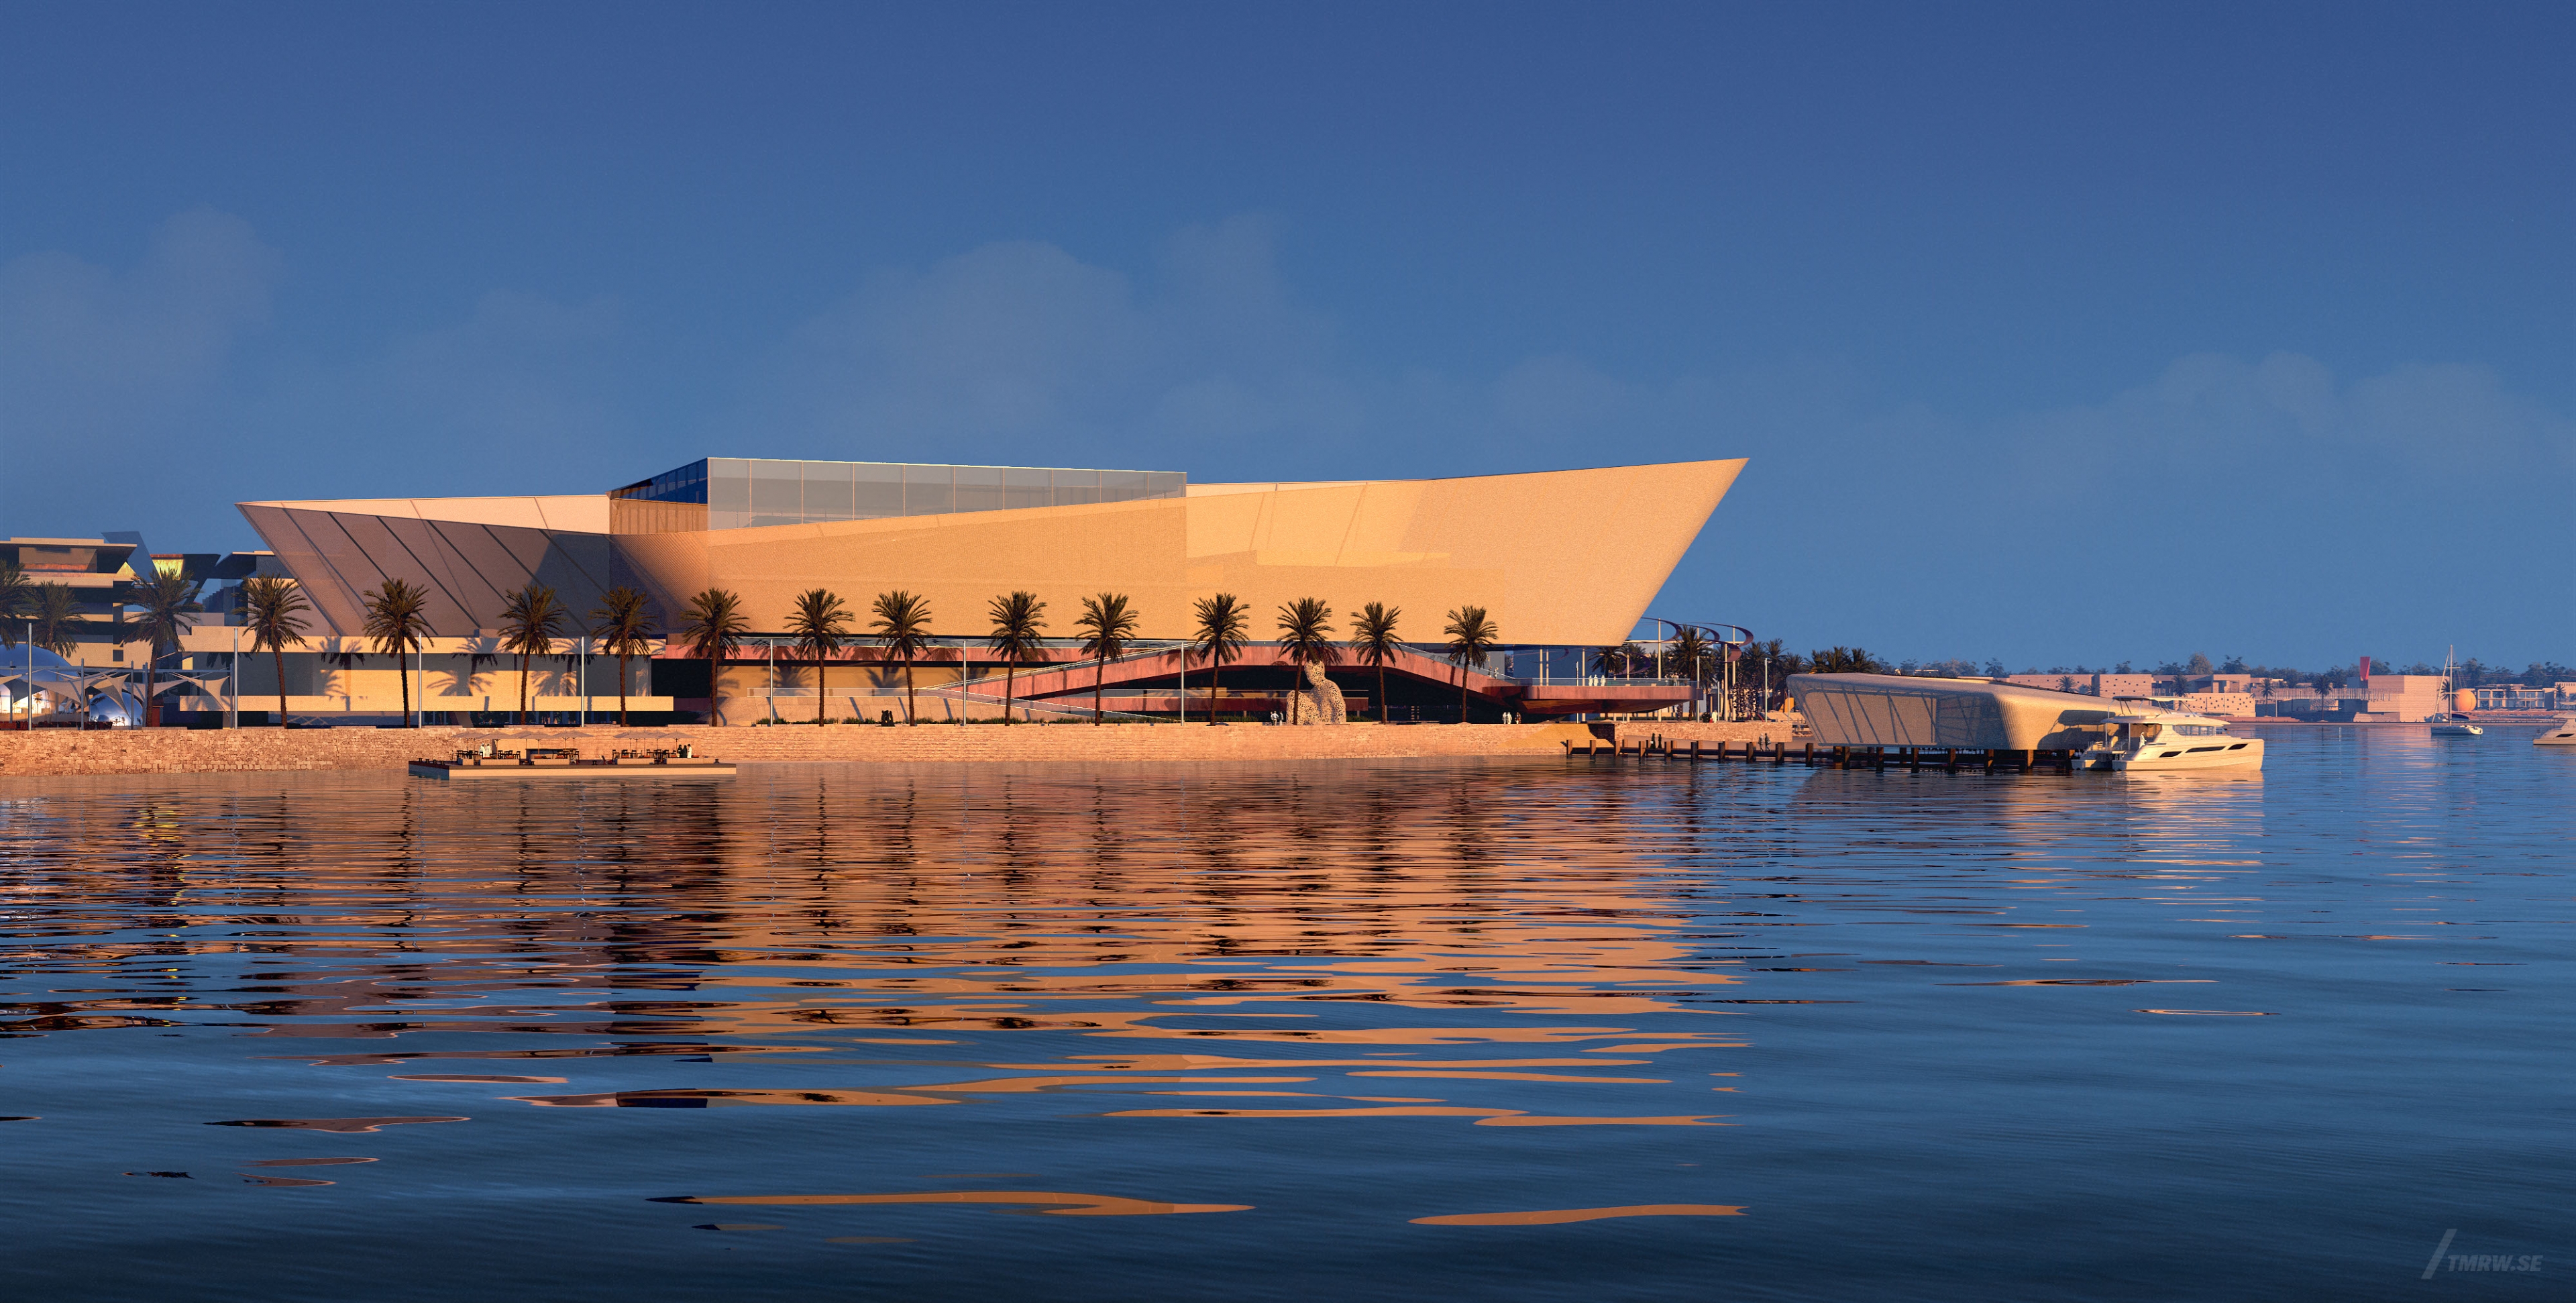 Architectural visualization of Miraya for HKS. An image of a museum with ocean infront at golden hour from street view.